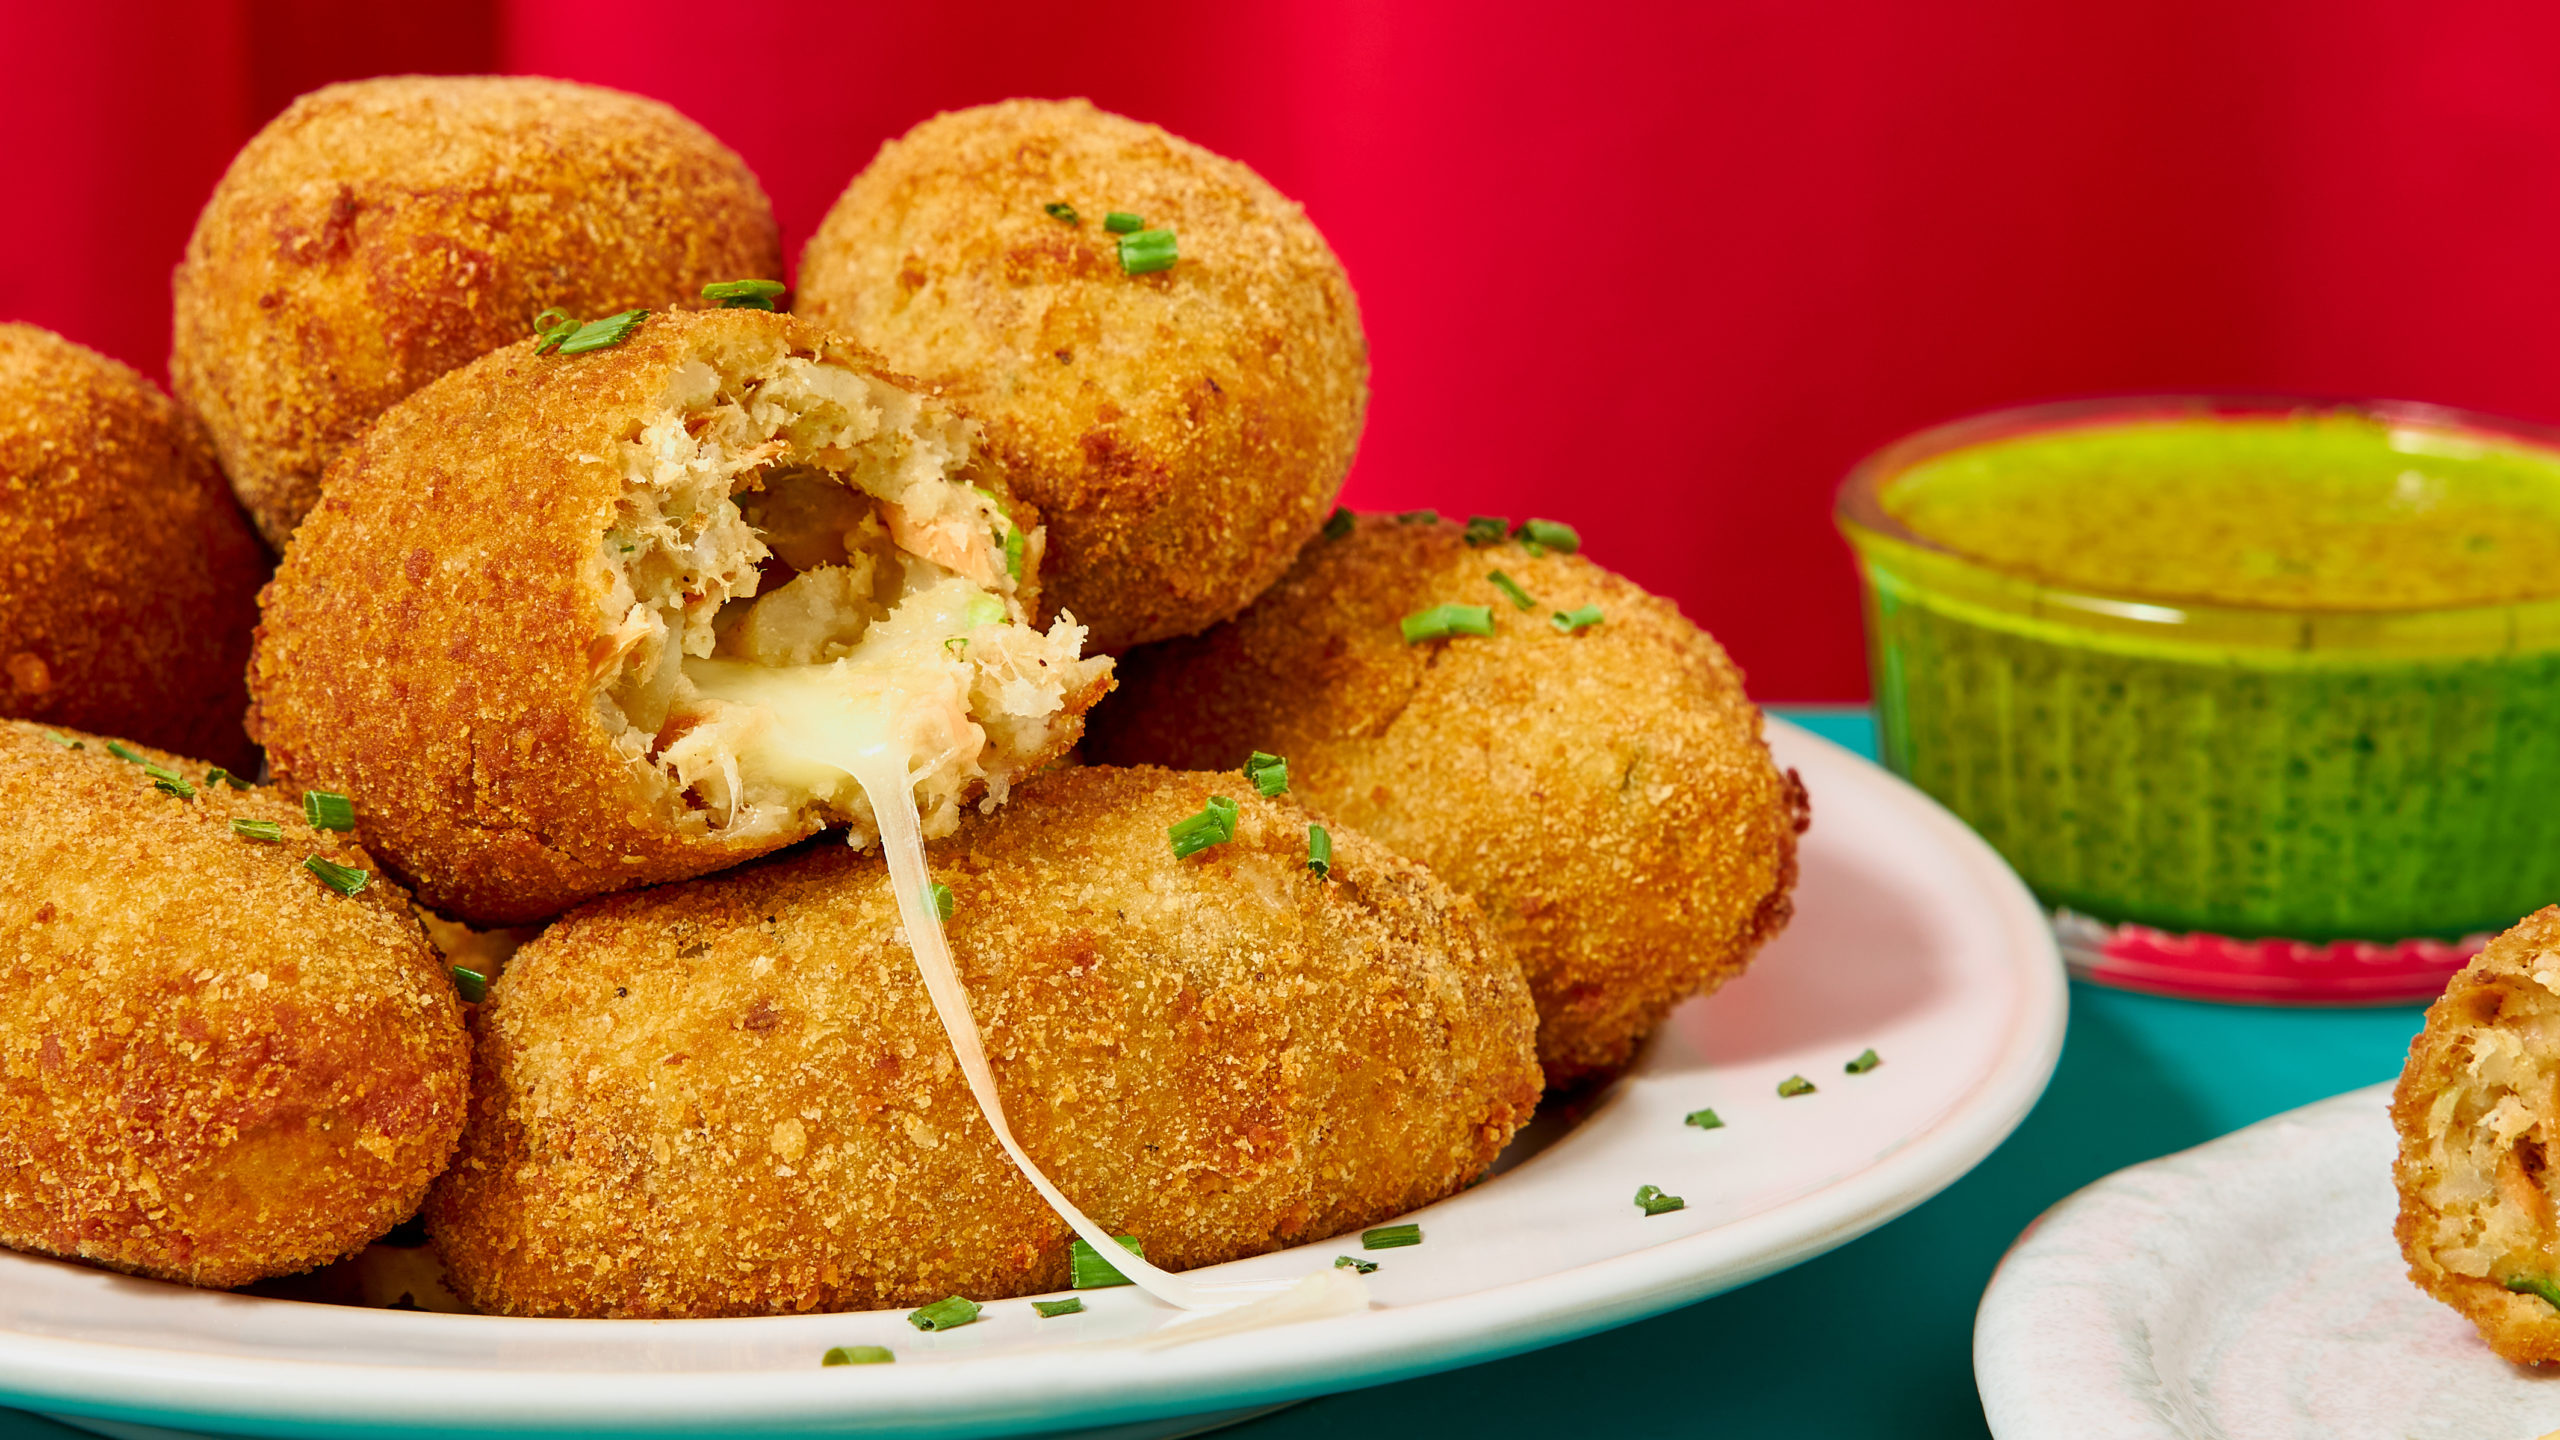 Croquette Wallpapers